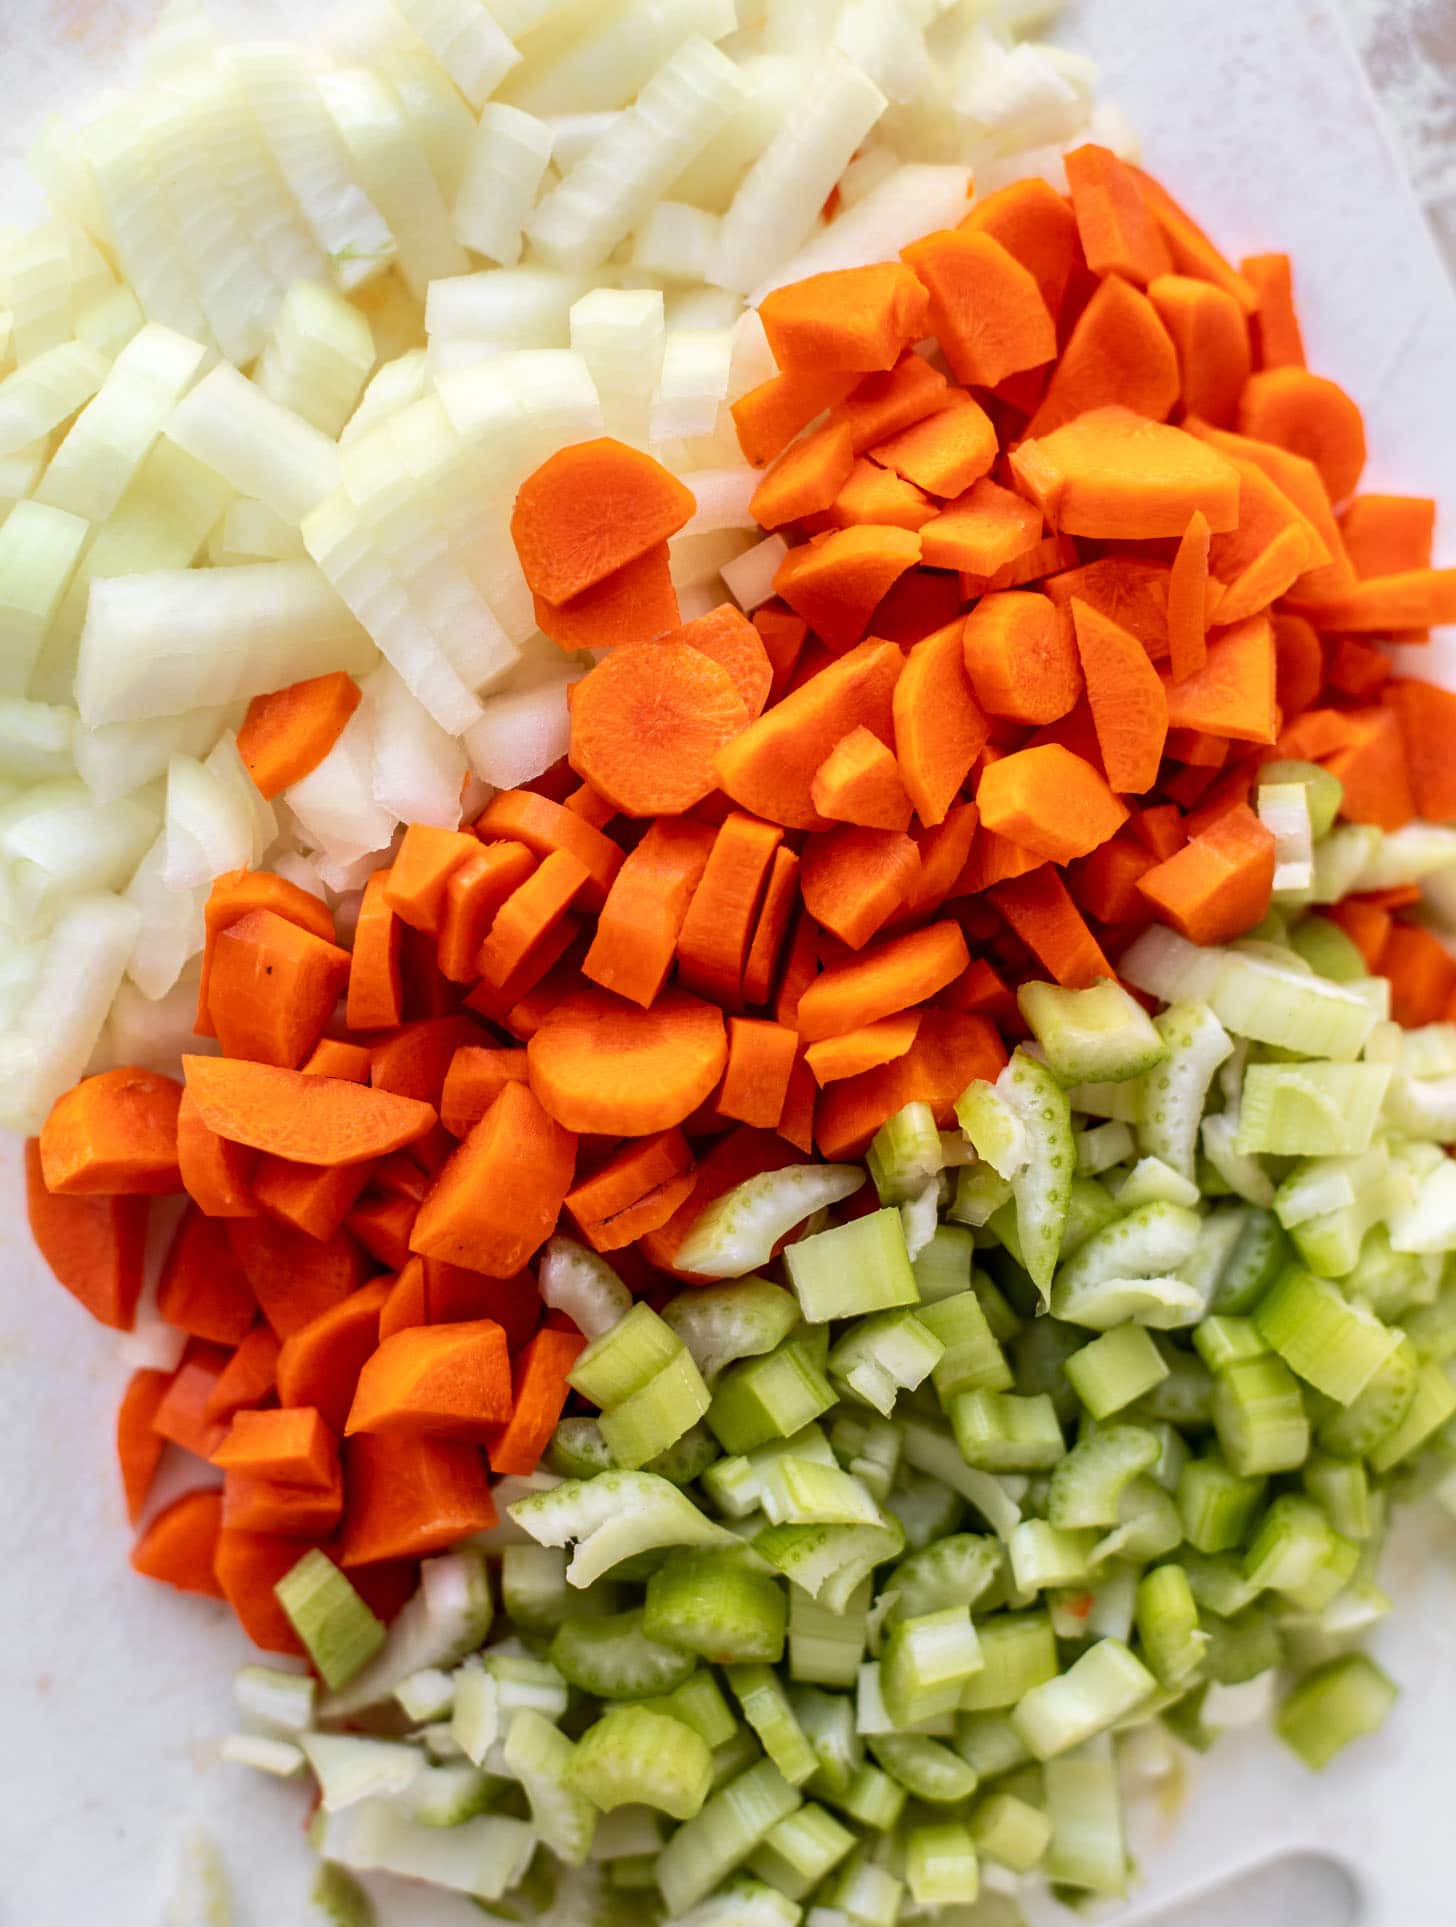 chopped onions, carrots and celery